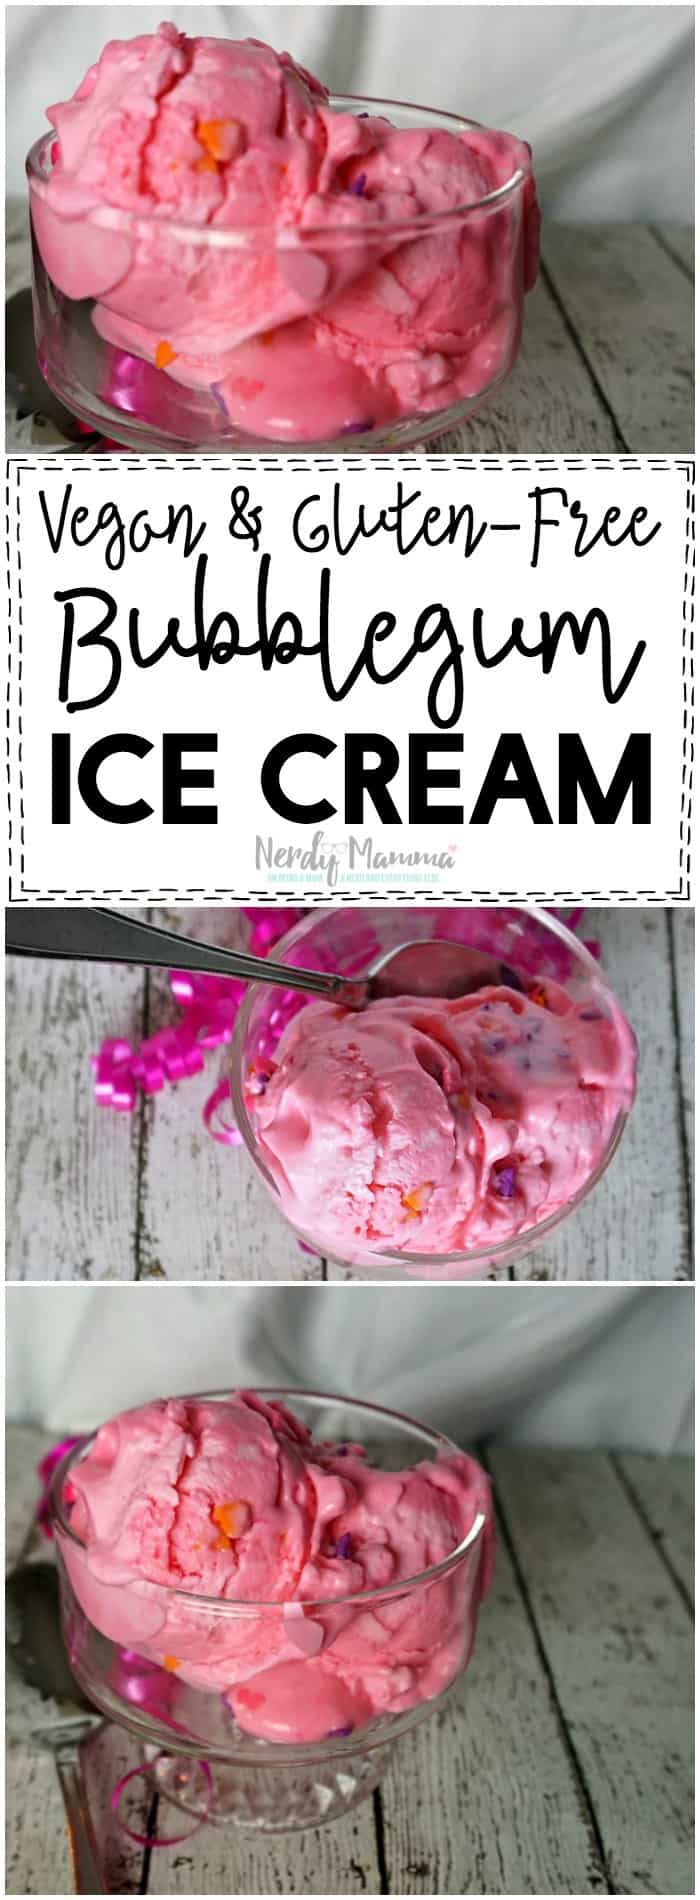 OMG! I love this Vegan and Gluten-Free Bubblegum Ice Cream! So easy and PERFECT.